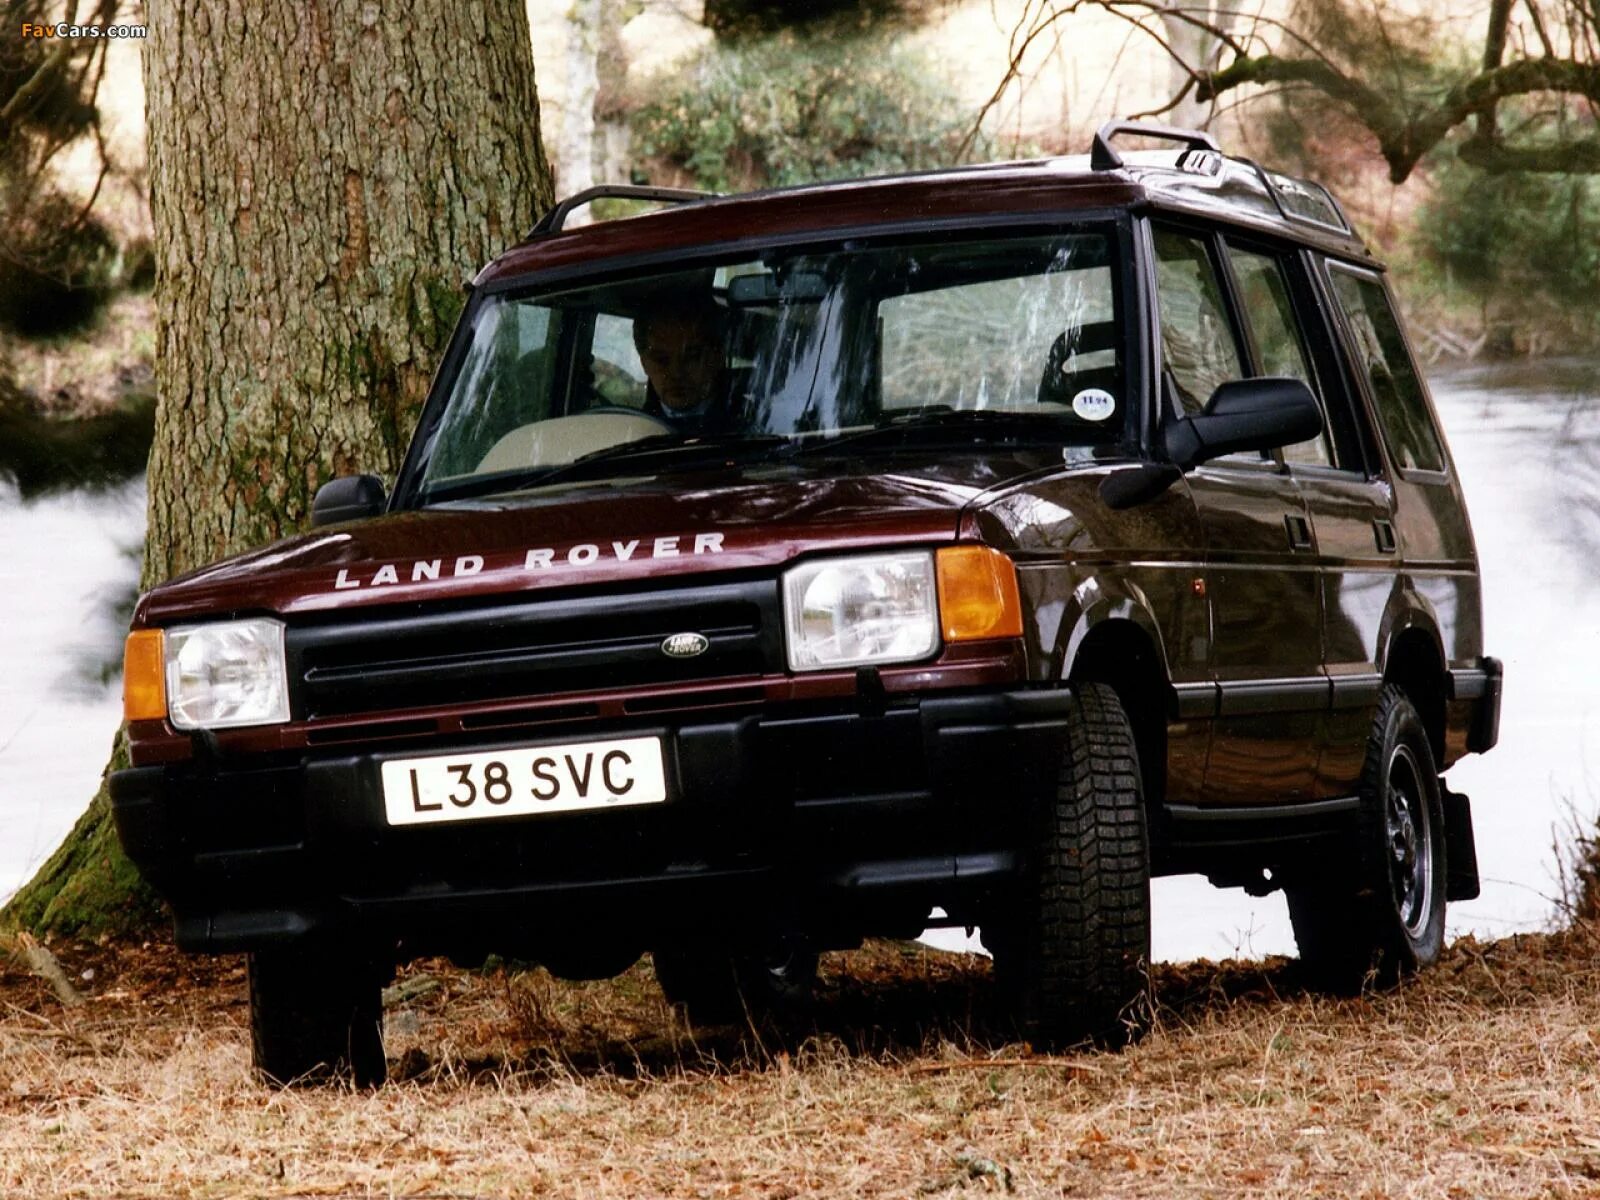 Land Rover Discovery 1. Ленд Ровер Дискавери 1994. Range Rover Discovery 1. Ленд Ровер Дискавери 1990. Дискавери б